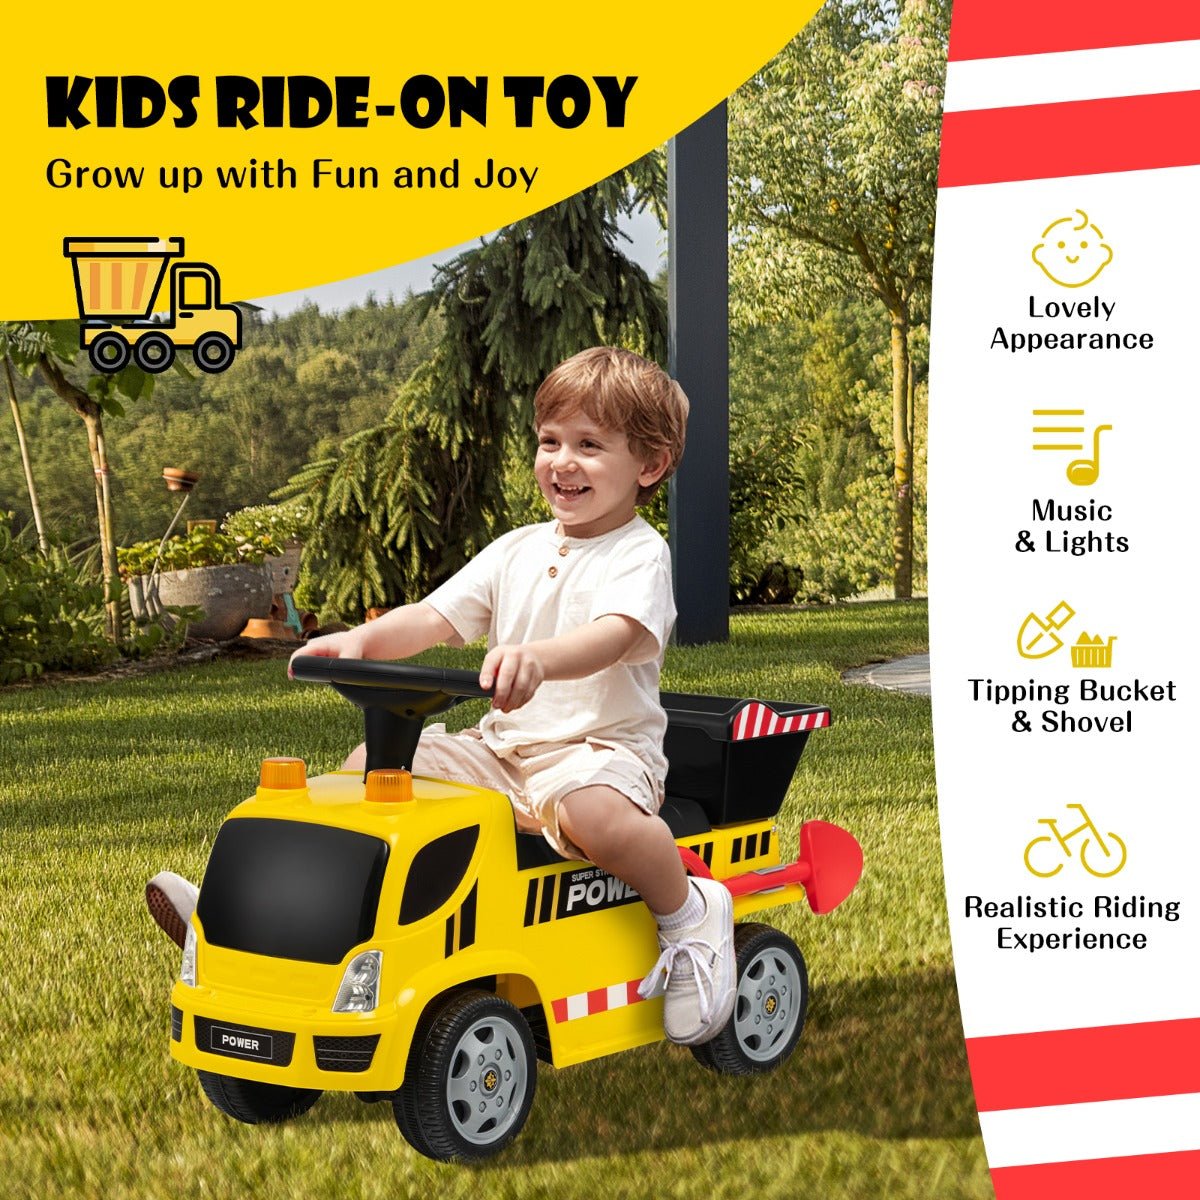 Yellow Toy Truck for Toddlers - Your Child's Dream Ride